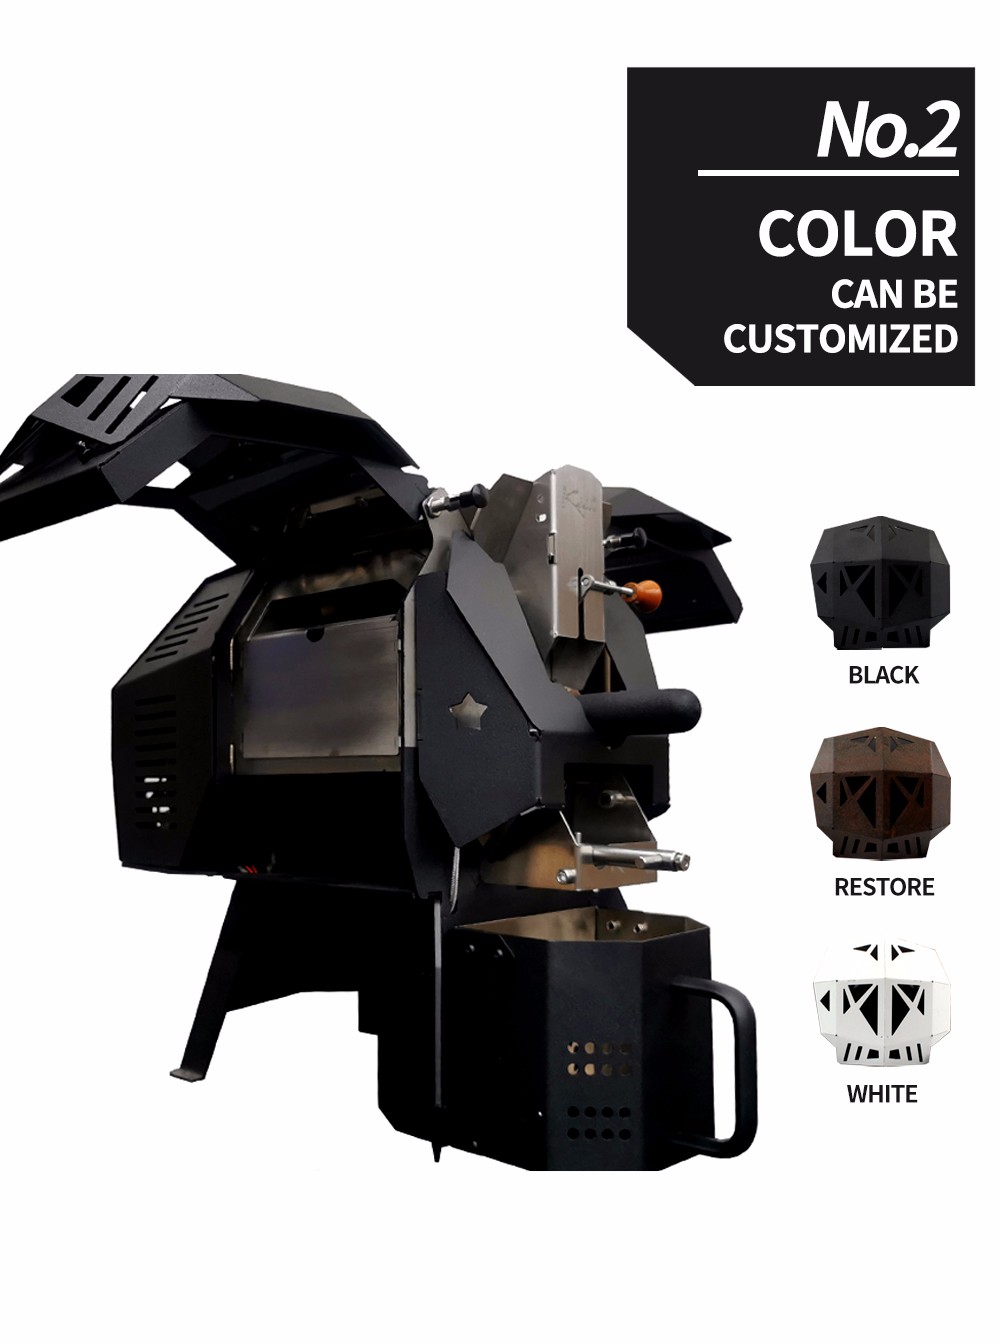 Color Customized Air Coffee Roaster